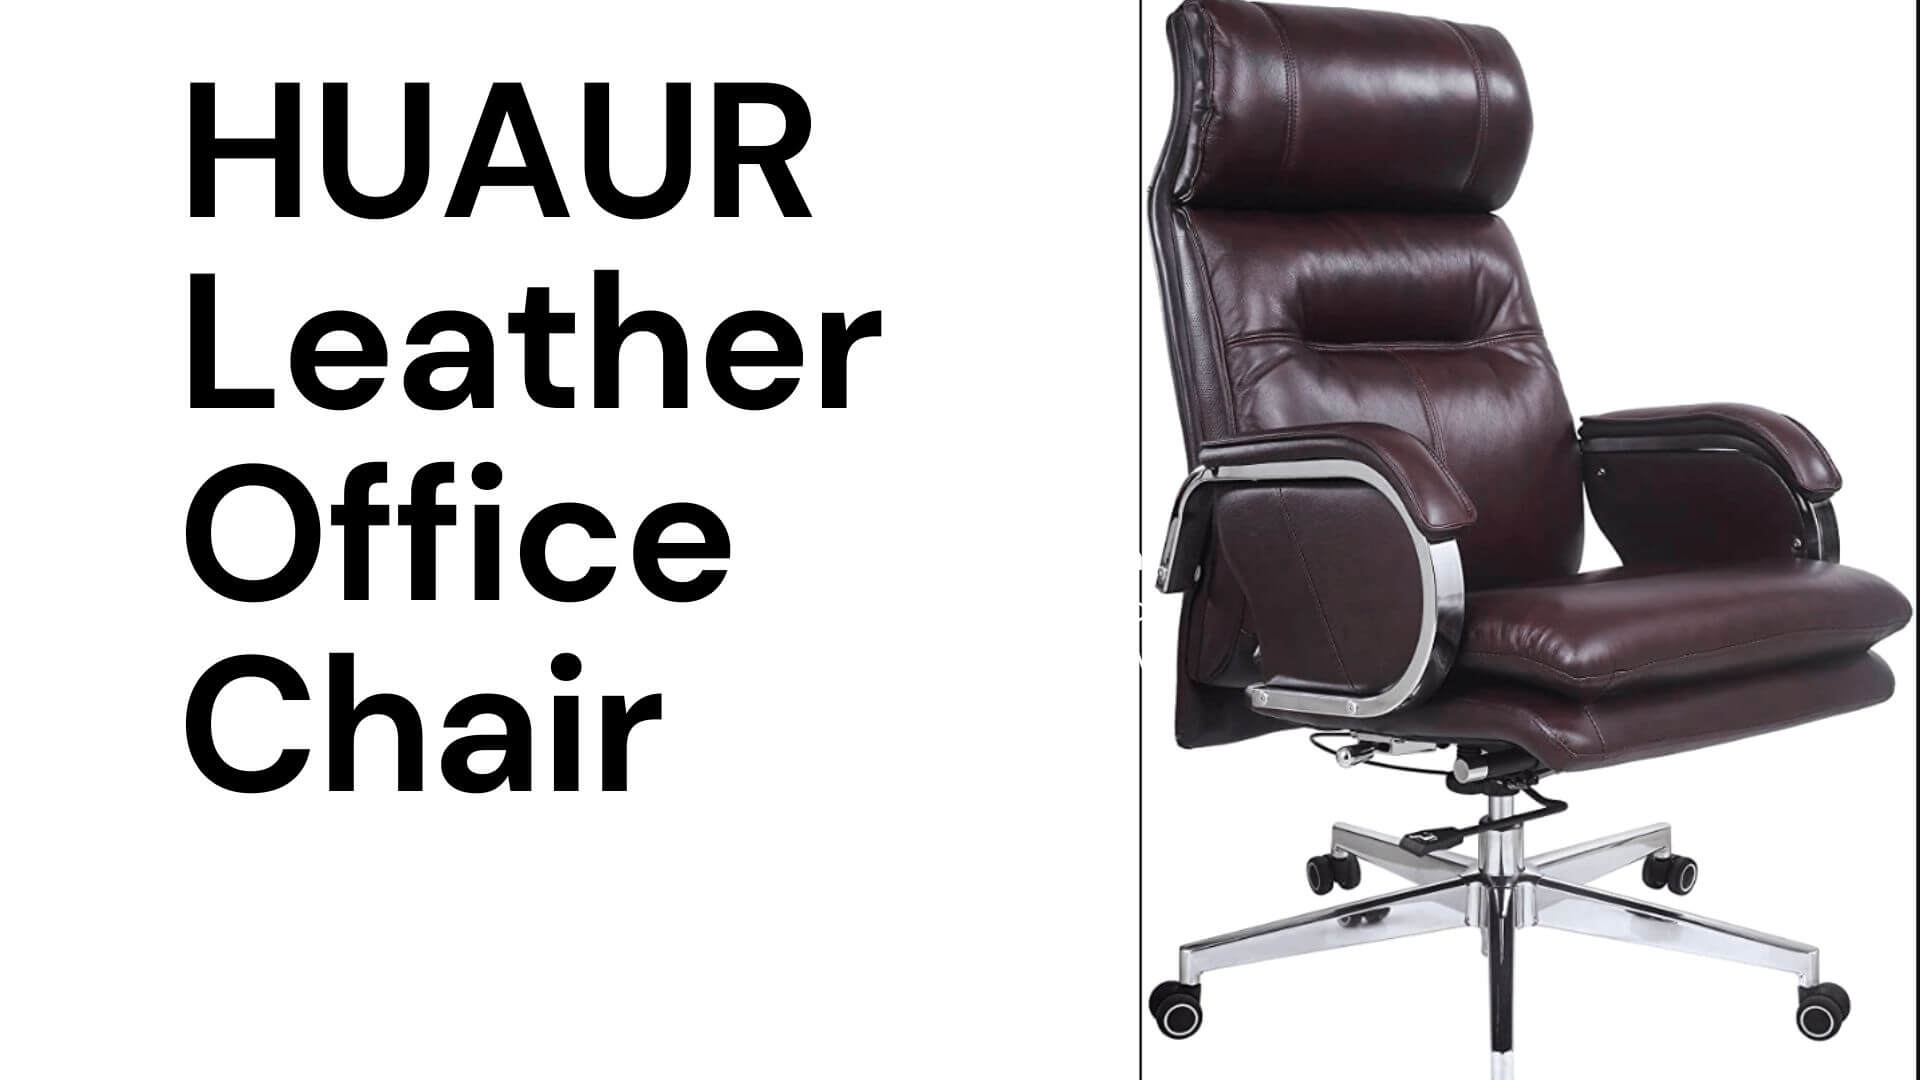 HUAUR Leather Office Chair